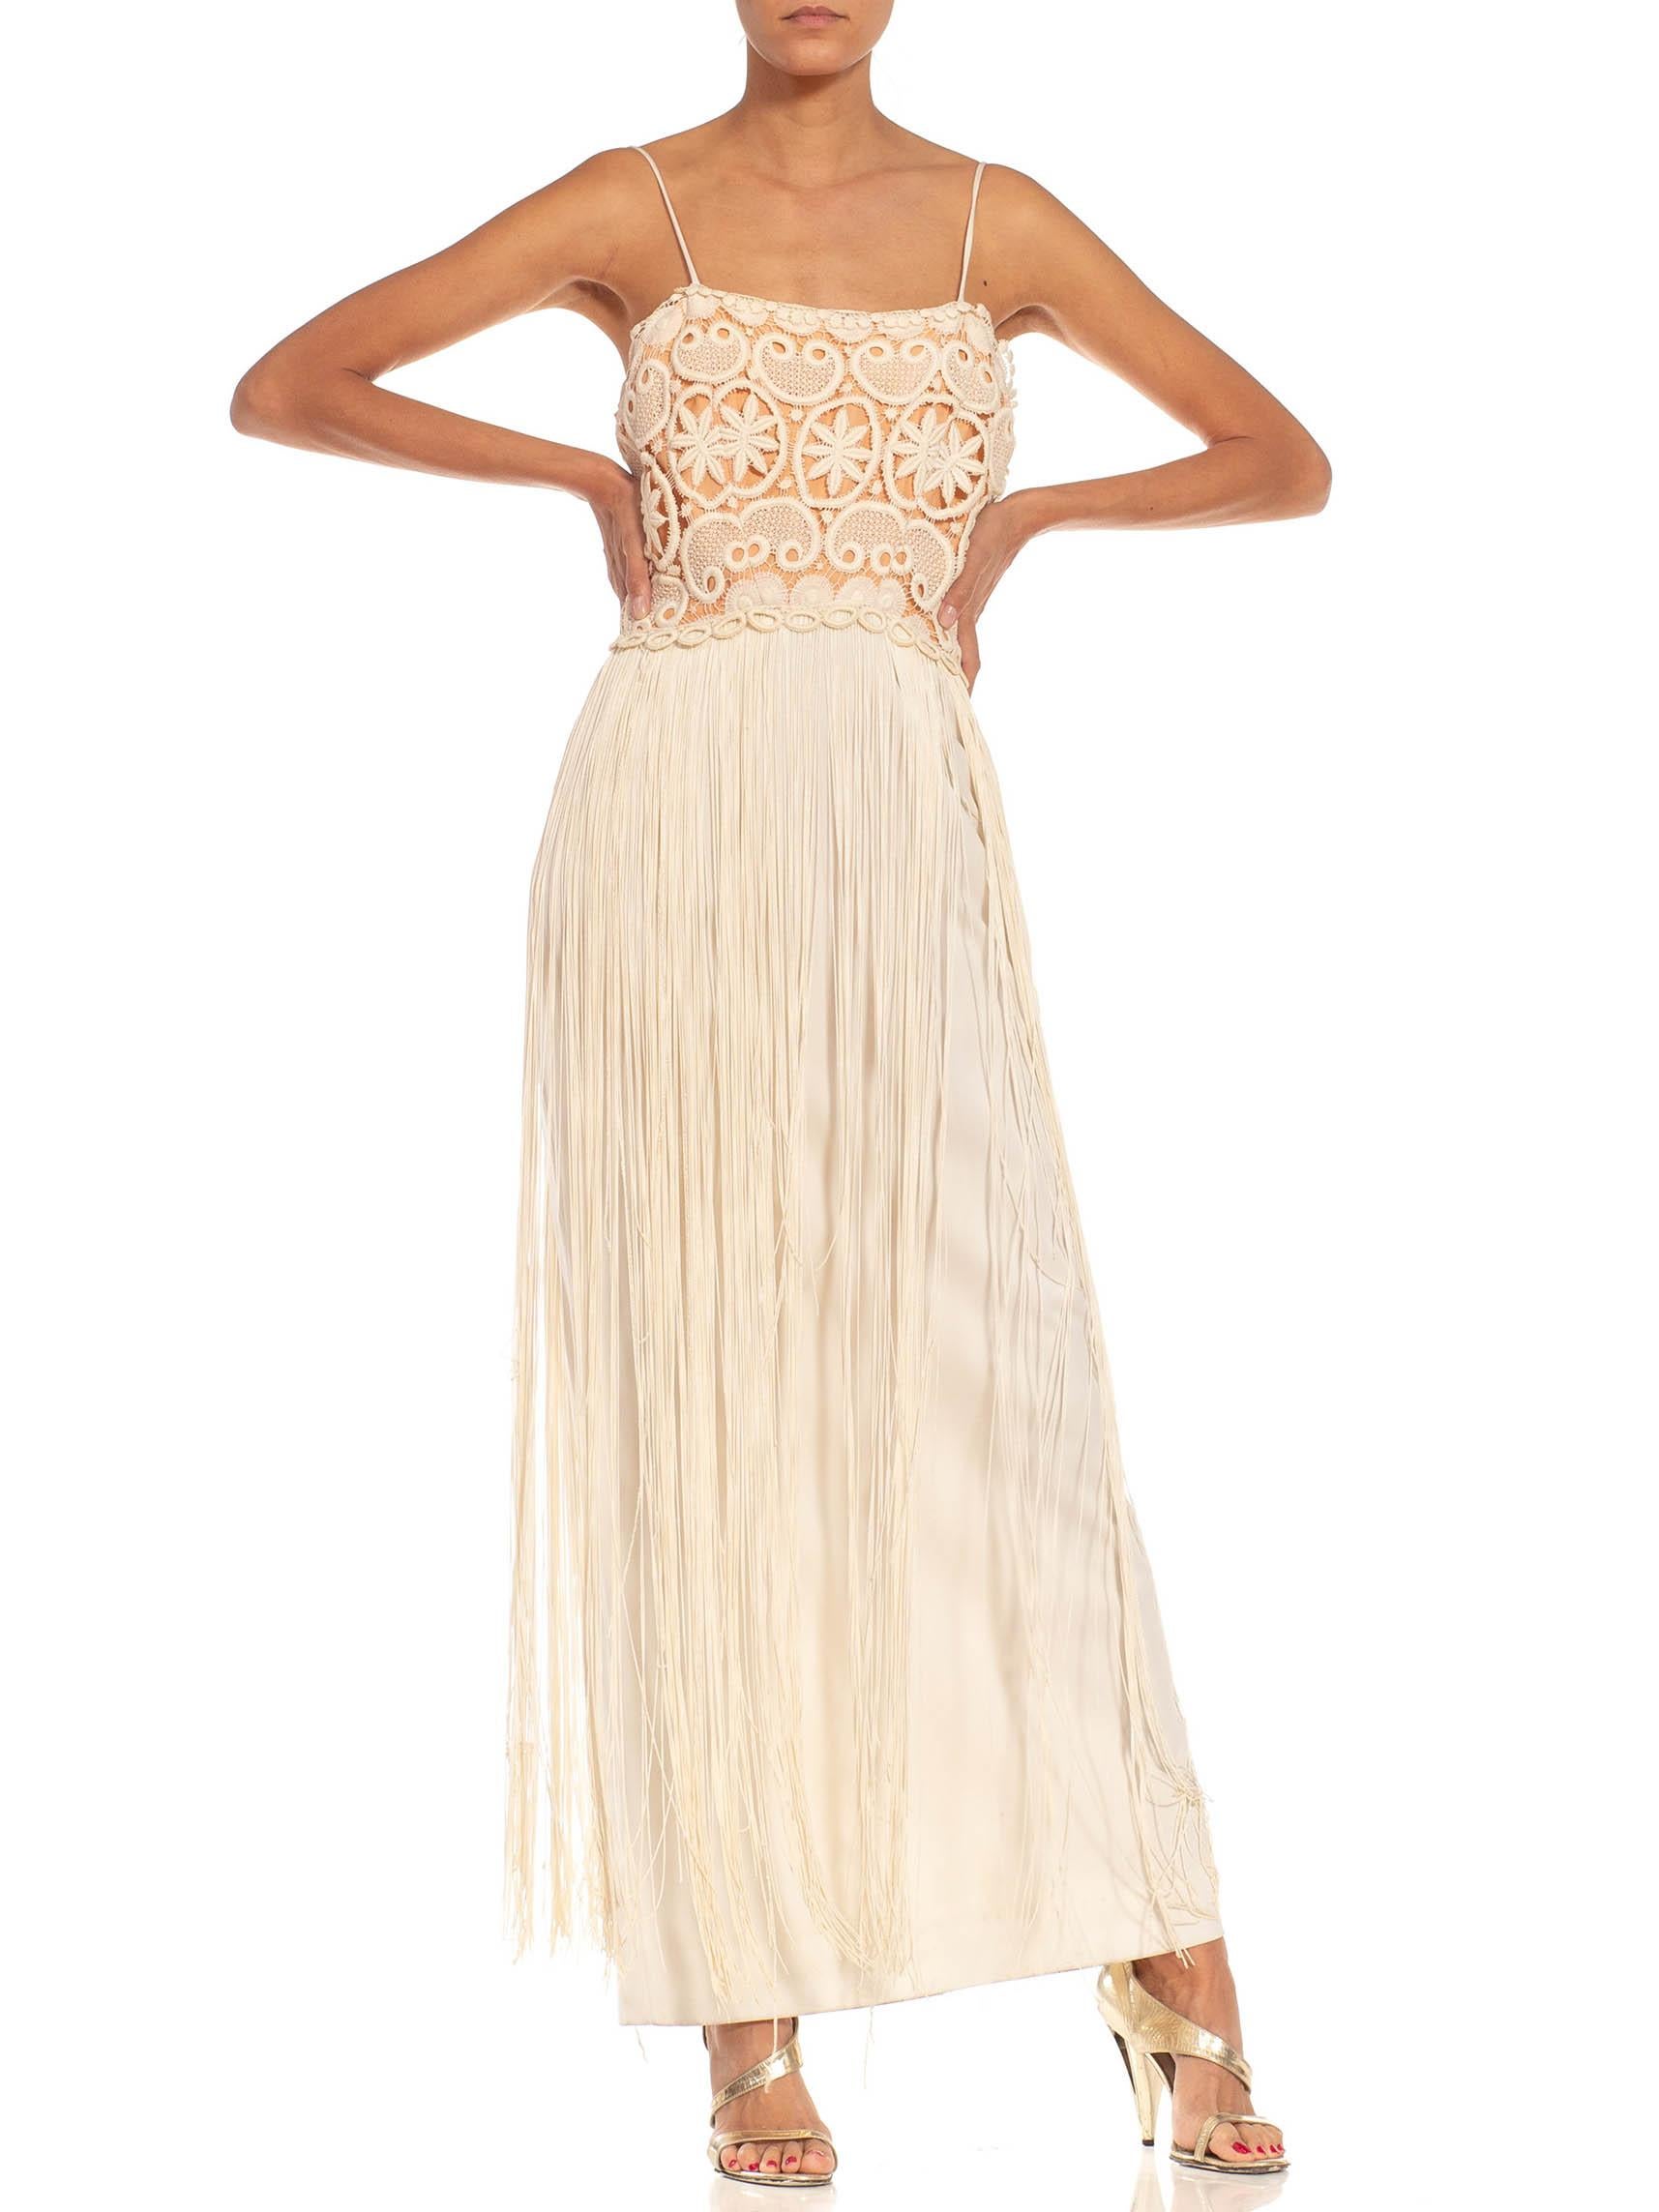 1970S Cream & Tan Lace Fringe Gown For Sale 4